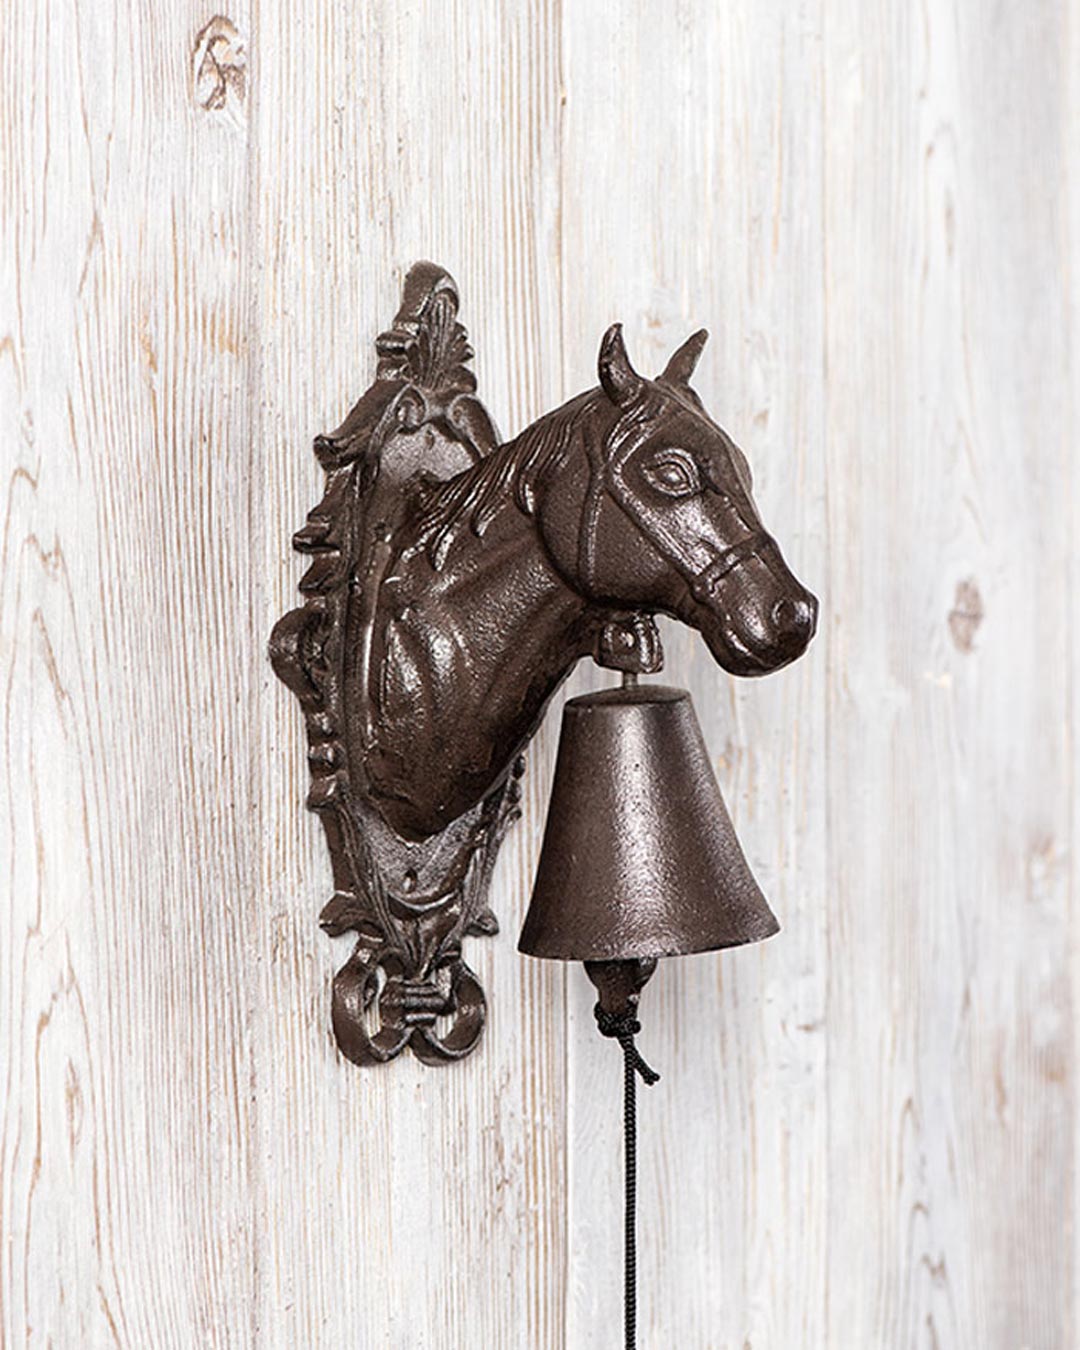 Ornate horse design on cast iron wall bell